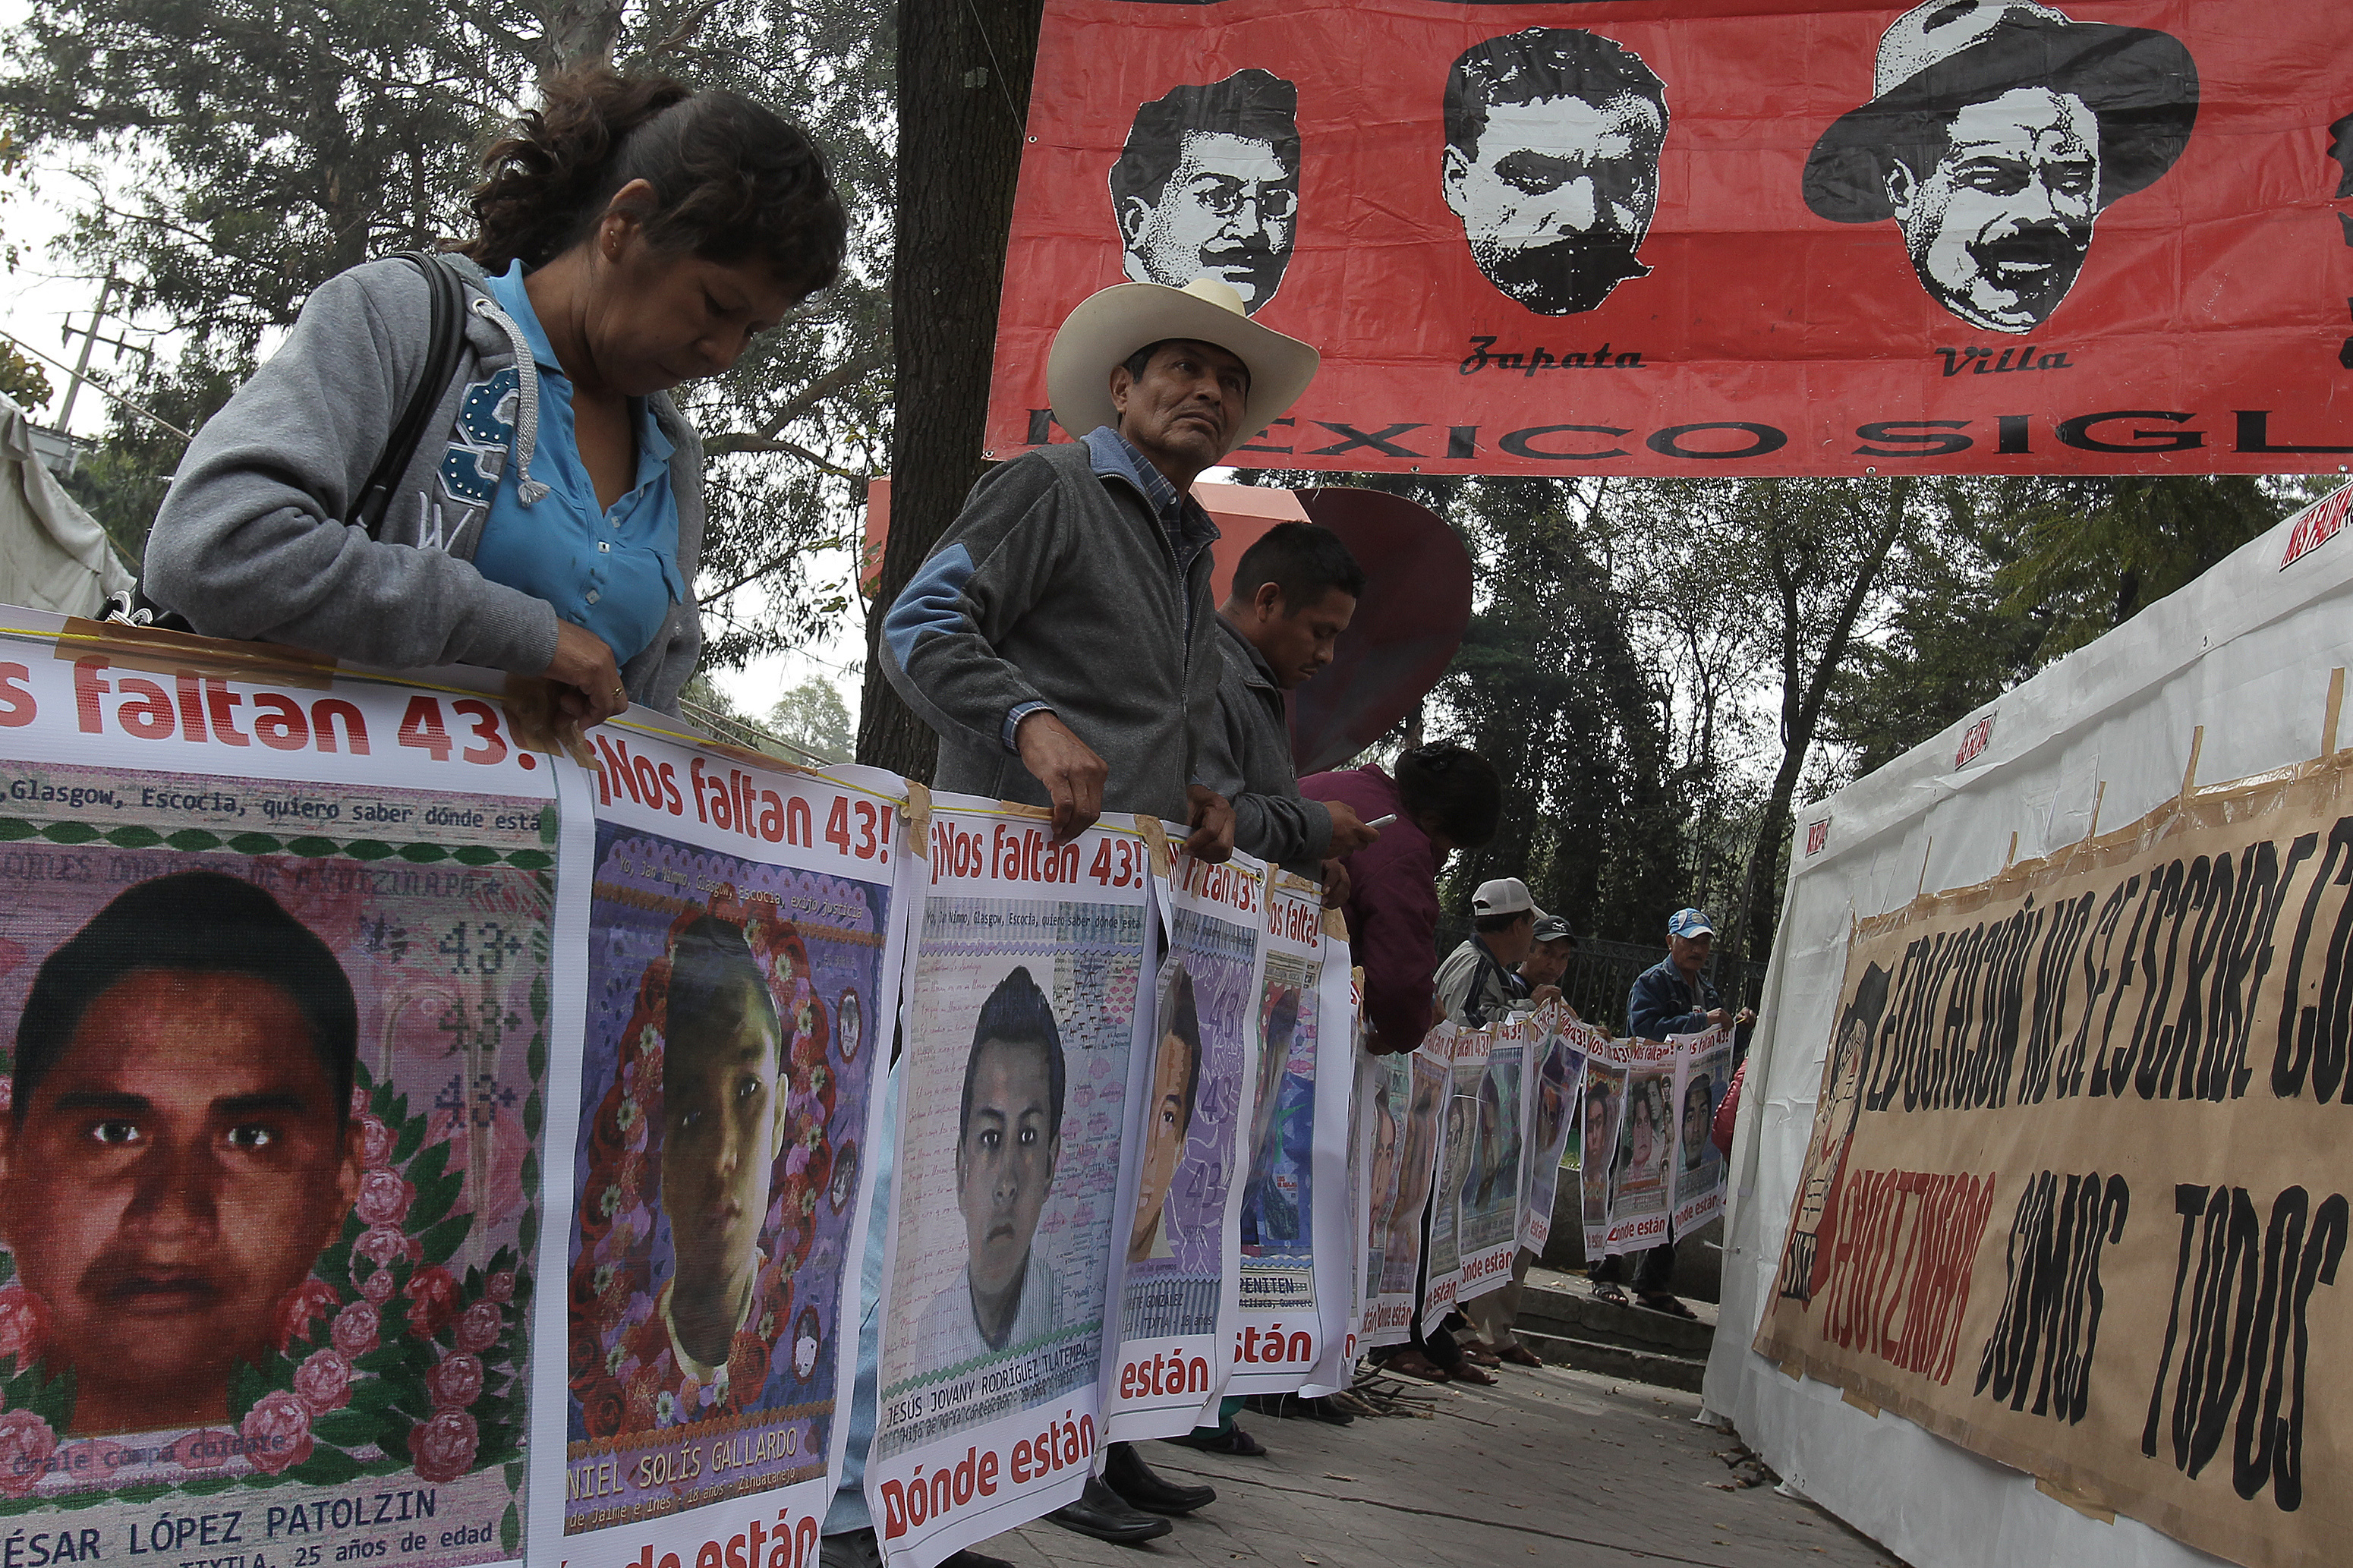 Relatives and friends of the 43 disappeared Ayotzinapa students during a sit-in protest November 27, 2015, near the presidential residence in Mexico City